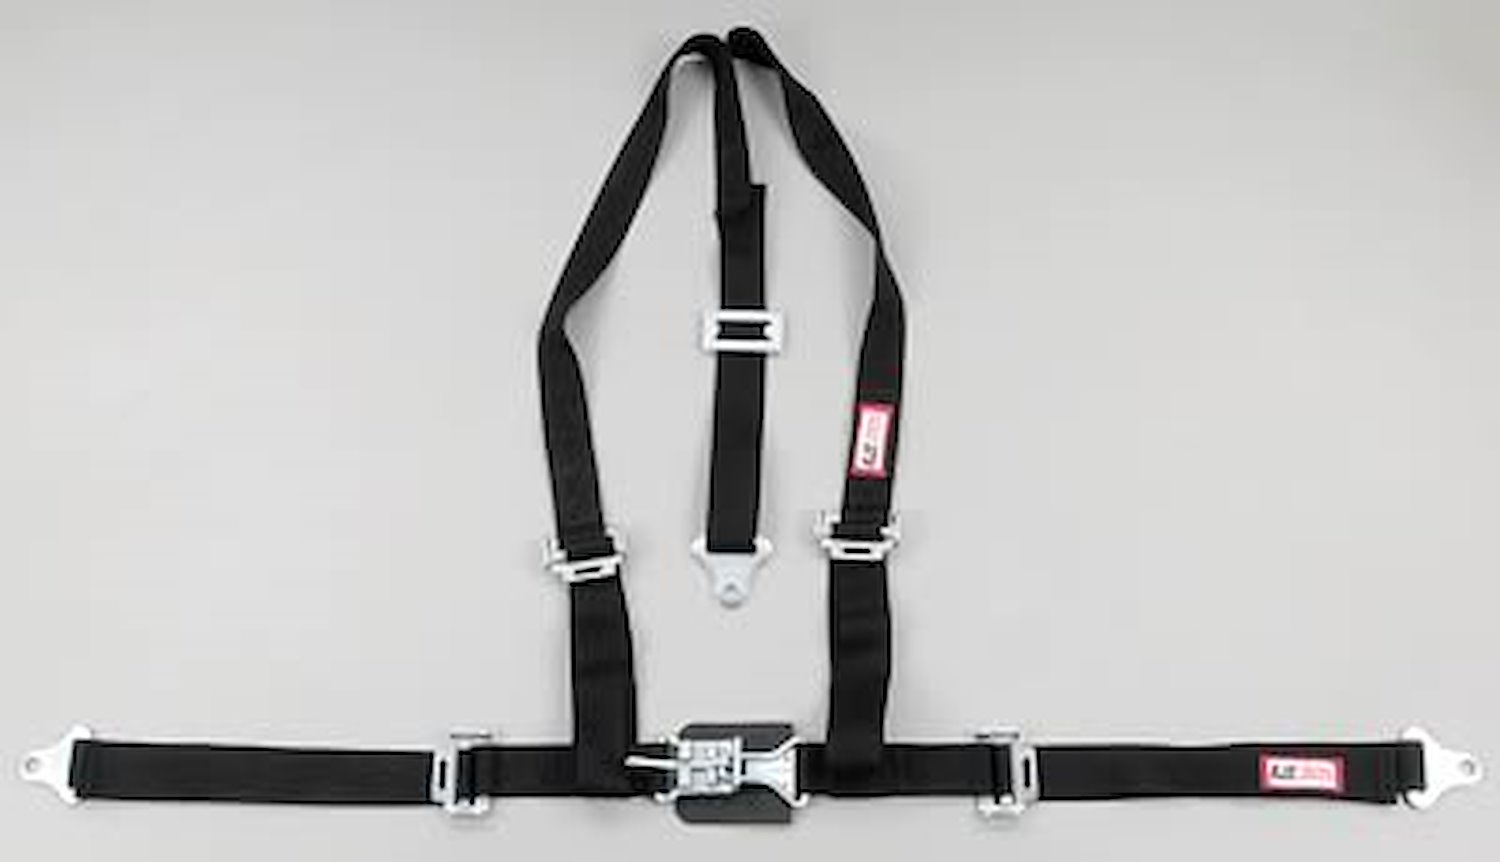 NON-SFI L&L HARNESS 3 PULL UP Lap BELT SNAP SEWN IN 2 S.H. Y FLOOR Mount w/STERNUM STRAP WRAP/BOLT RED